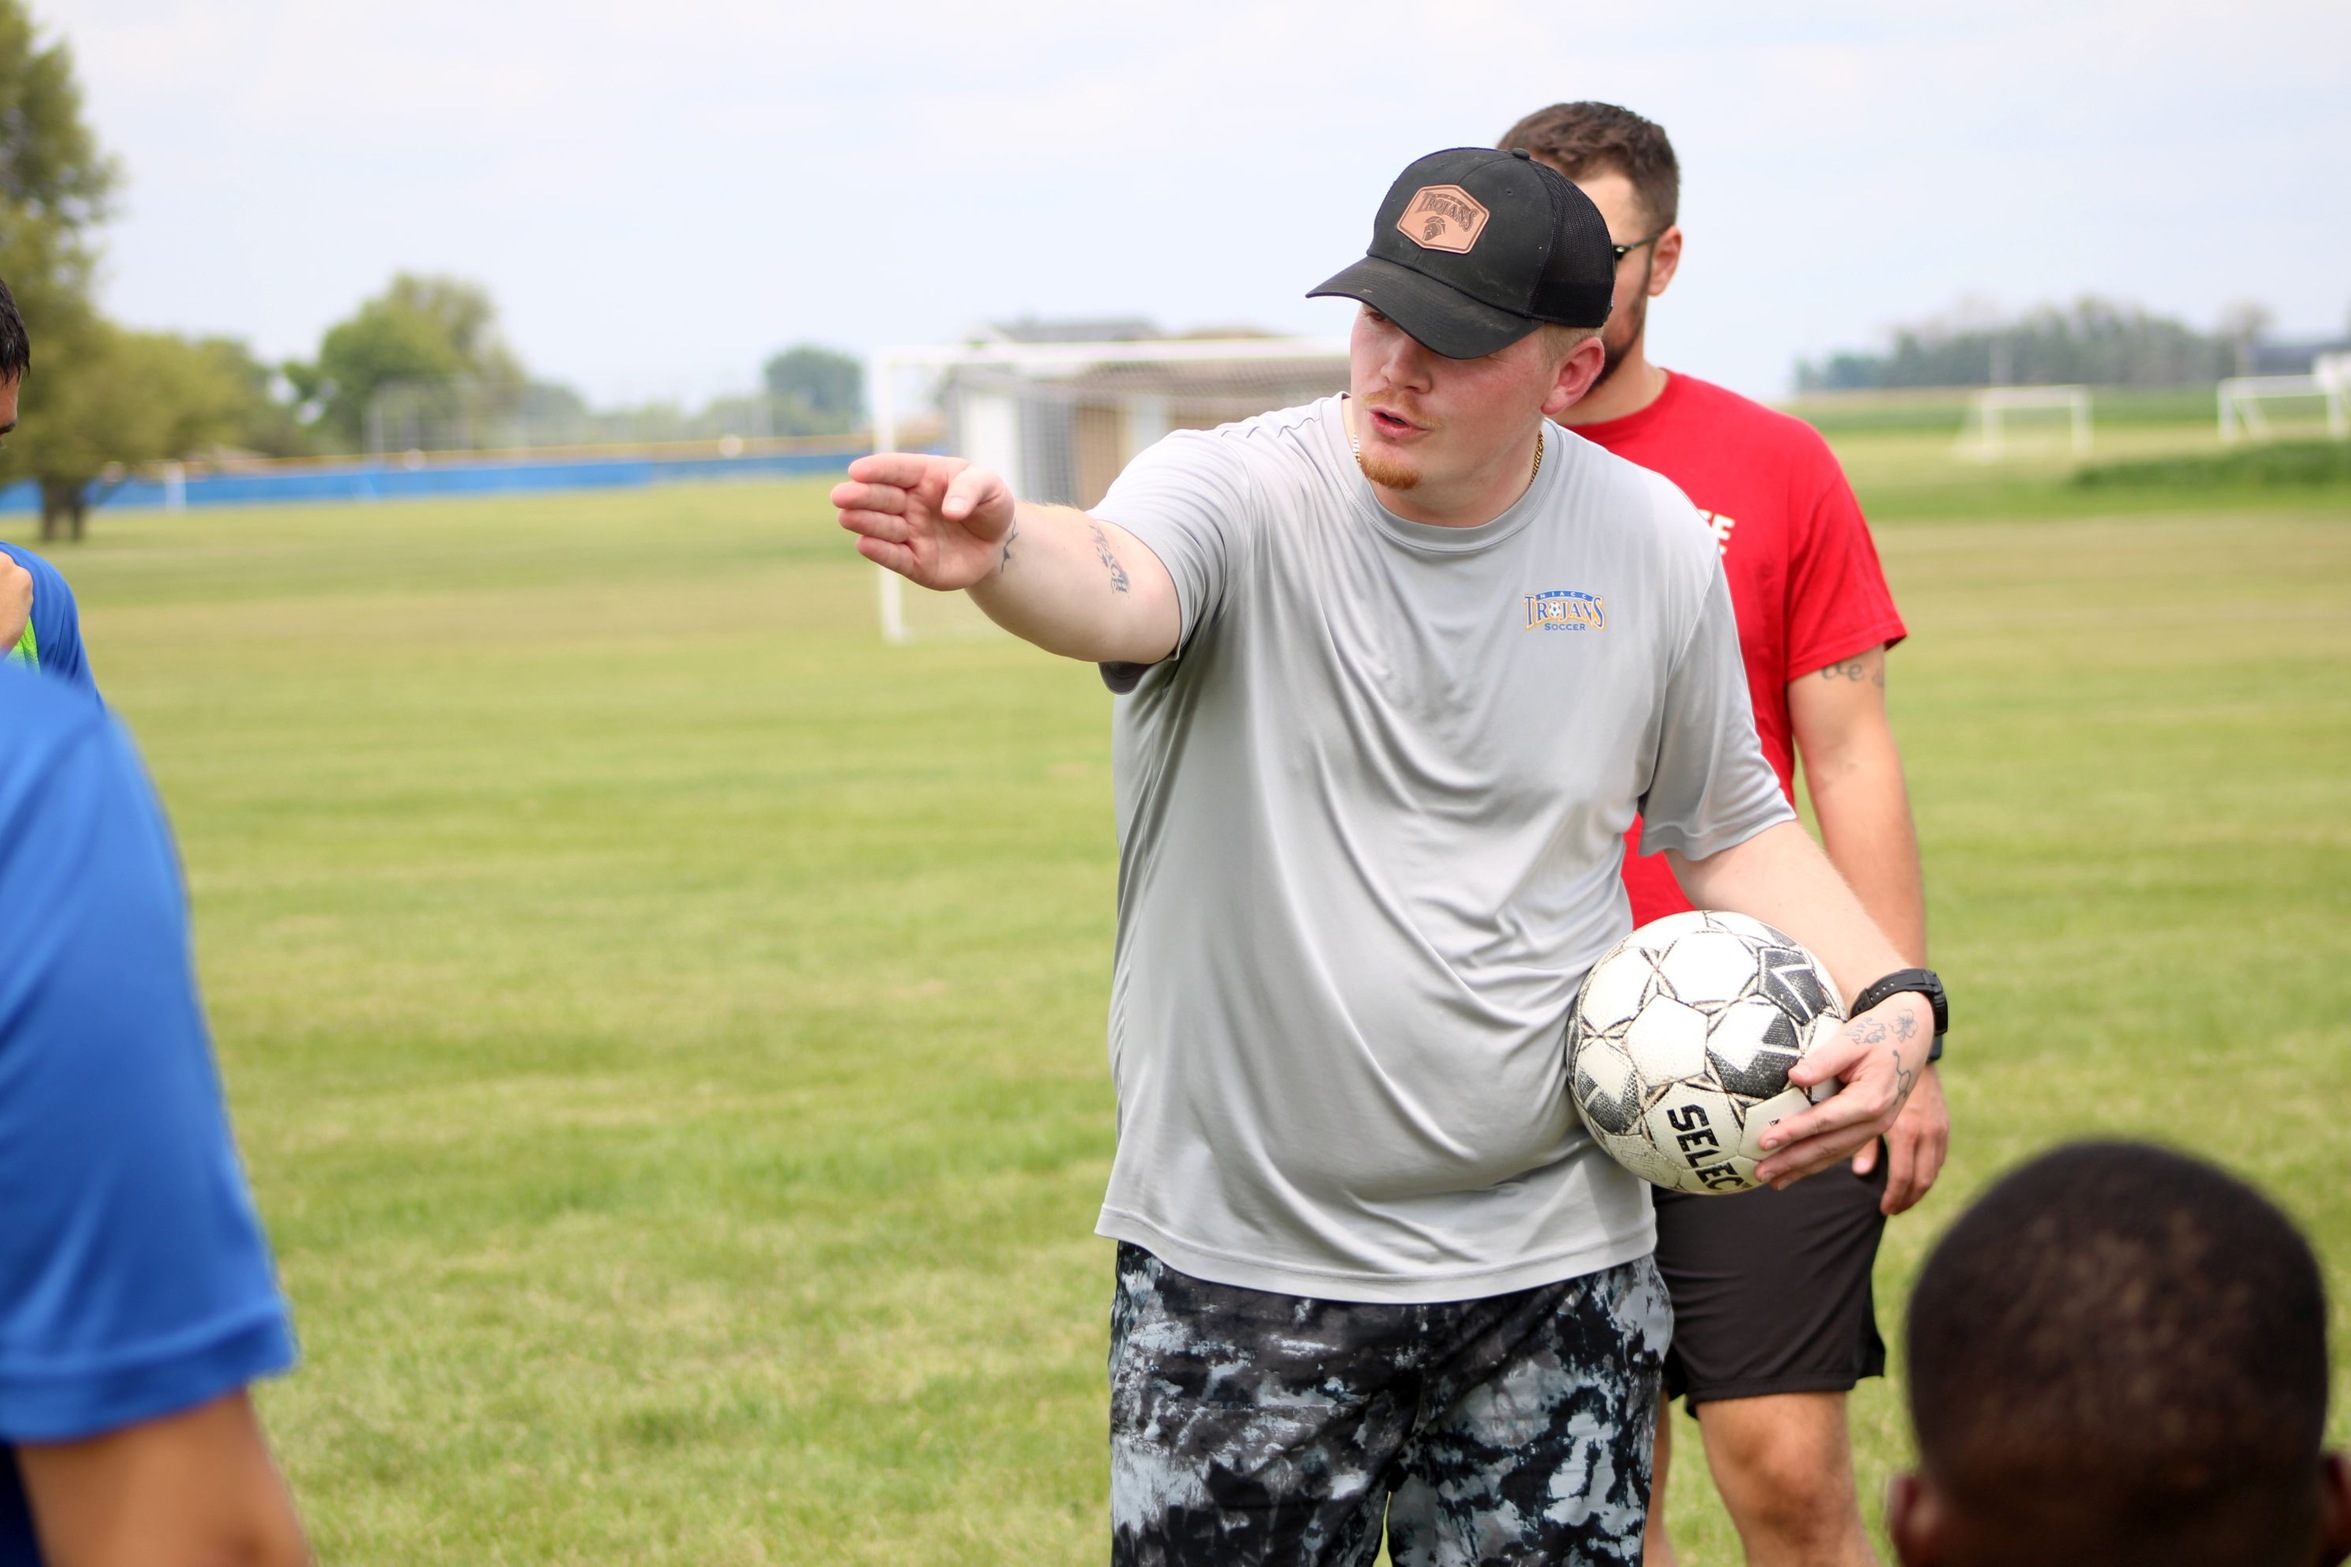 NIACC men's soccer coach Gannon Harsma at Tuesday's first day of practice on the NIACC campus.